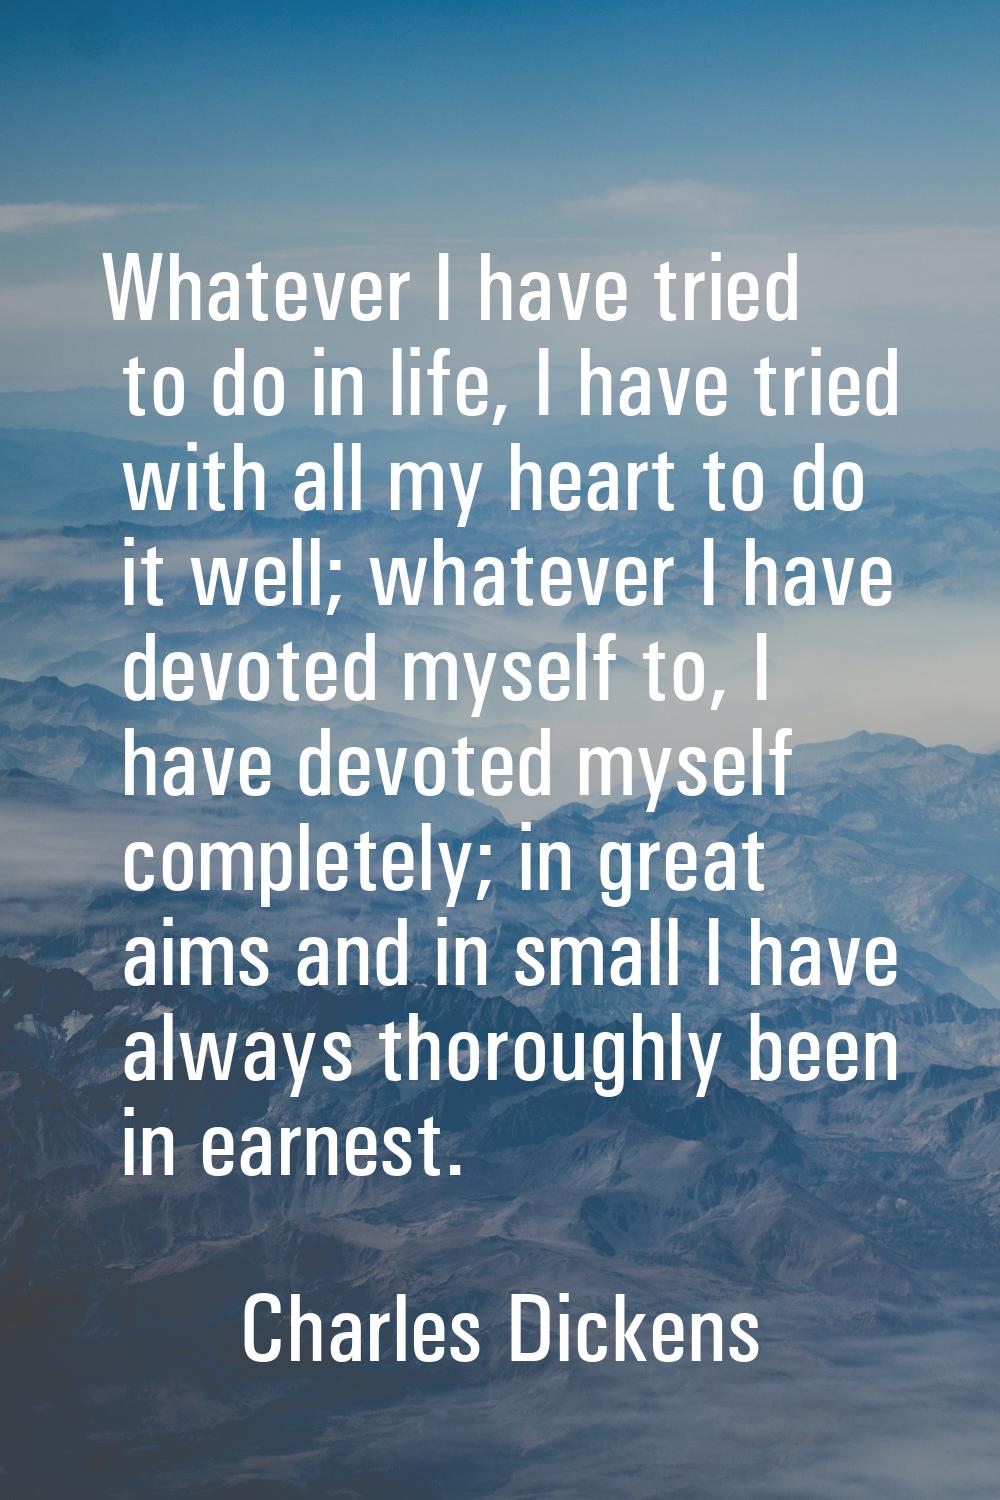 Whatever I have tried to do in life, I have tried with all my heart to do it well; whatever I have 